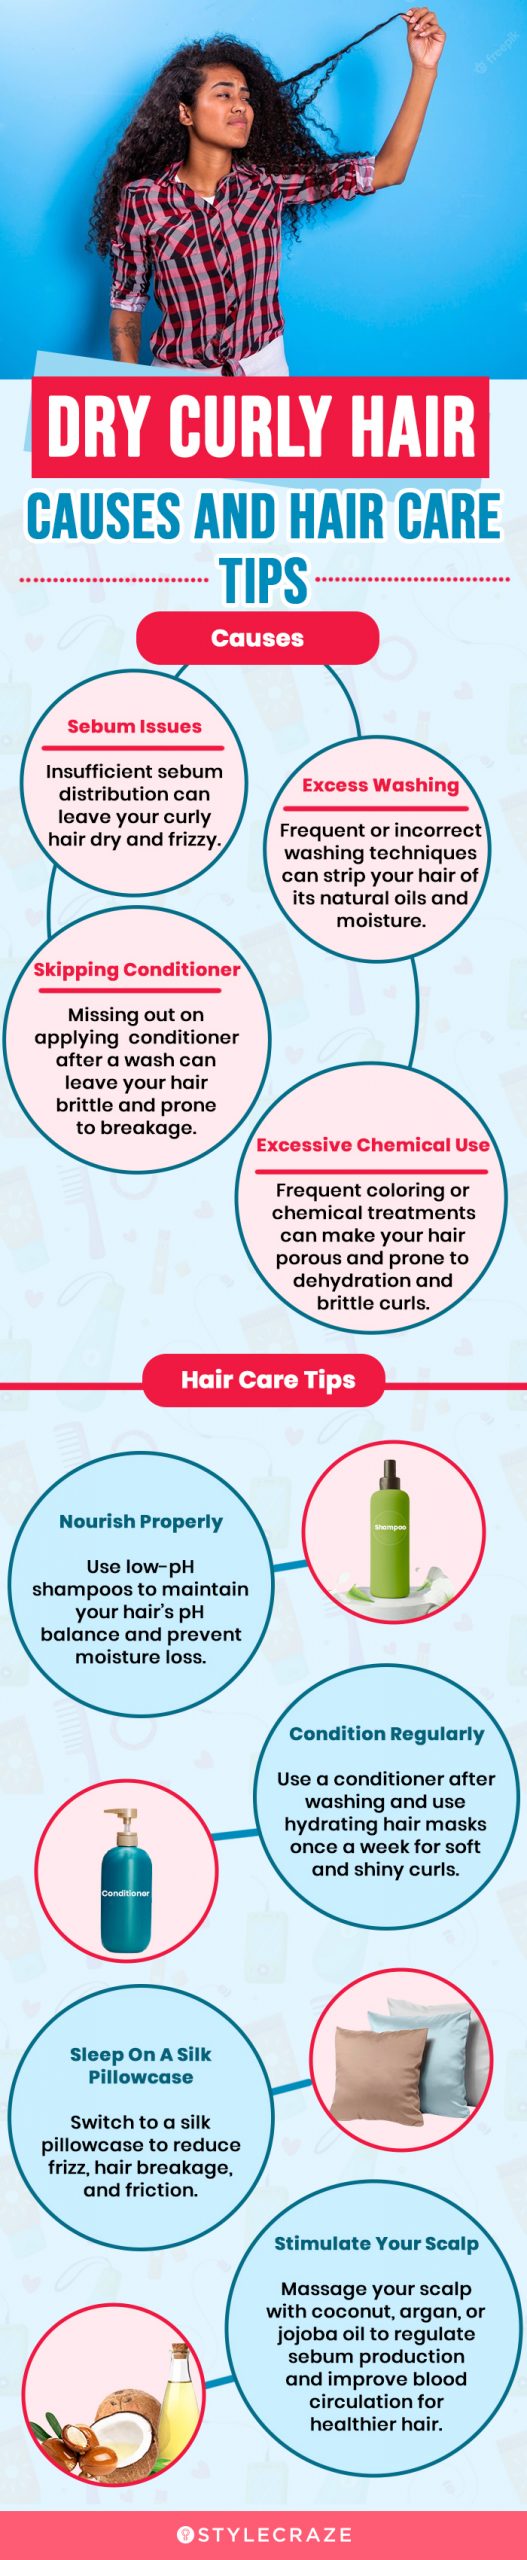 causes and hair care tips for dry curly hair (infographic)